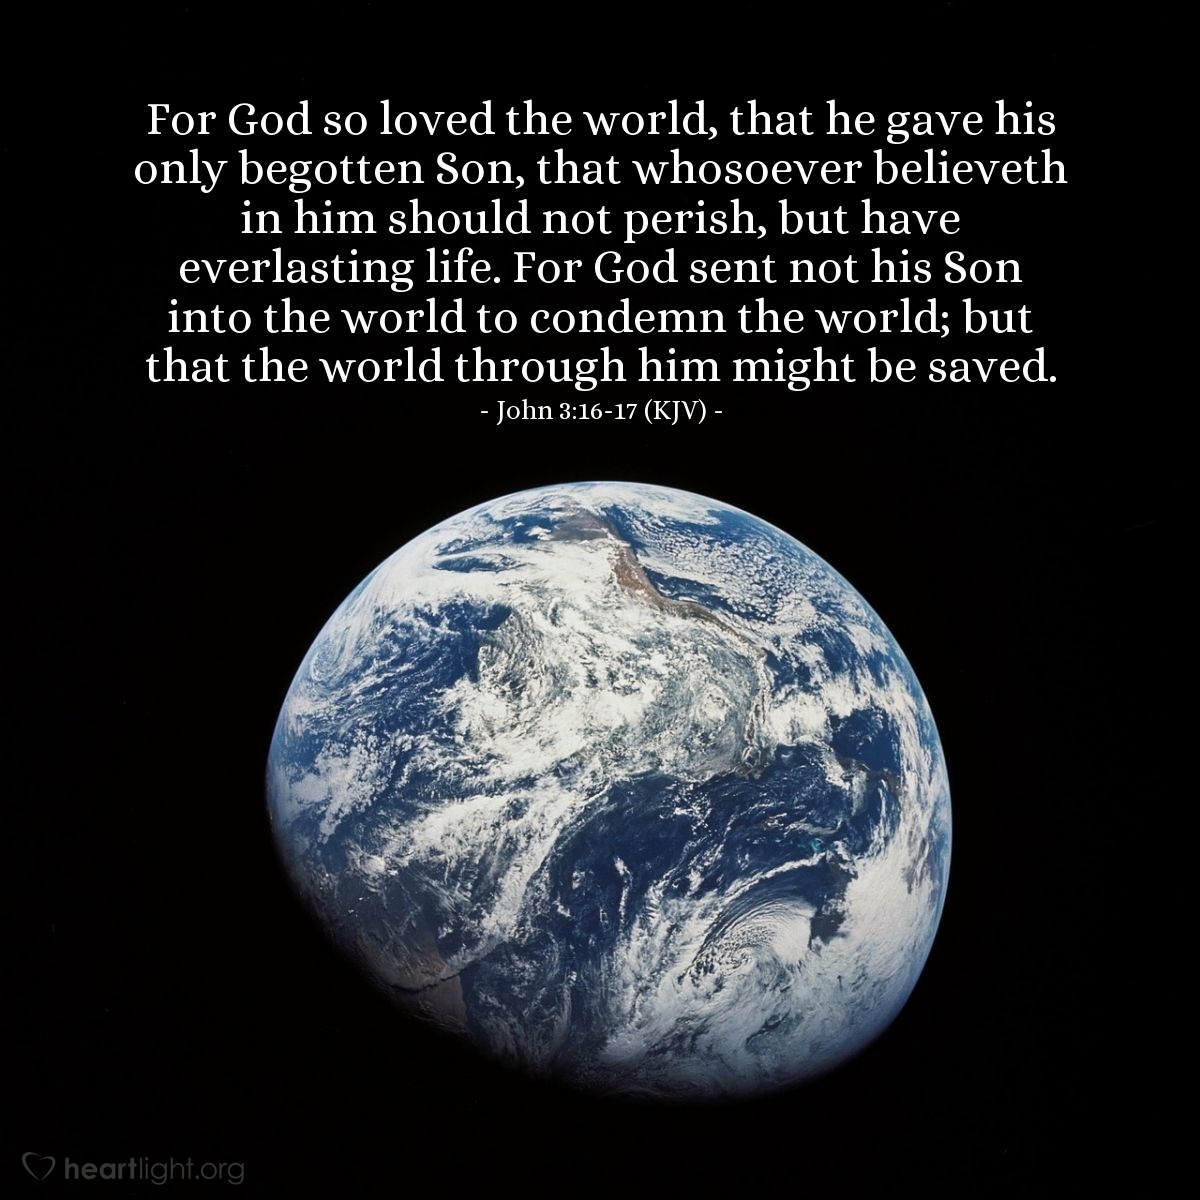 Illustration of John 3:16-17 (KJV) — For God so loved the world, that he gave his only begotten Son, that whosoever believeth in him should not perish, but have everlasting life. For God sent not his Son into the world to condemn the world; but that the world through him might be saved.